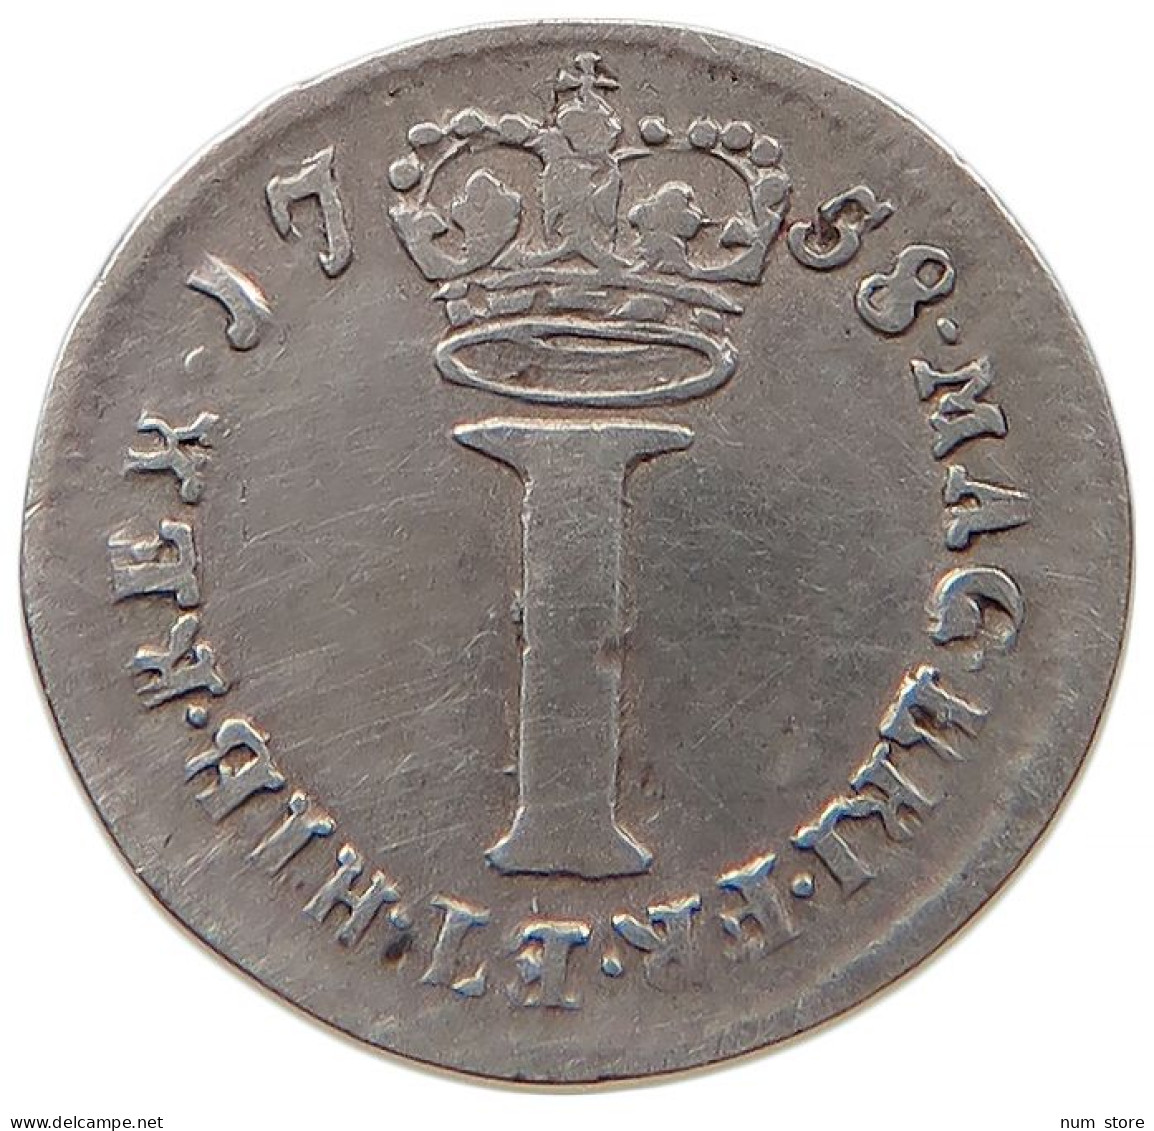 GREAT BRITAIN PENNY MAUNDY 1758 George II. 1727-1760. #t011 0385 - C. 1 Penny